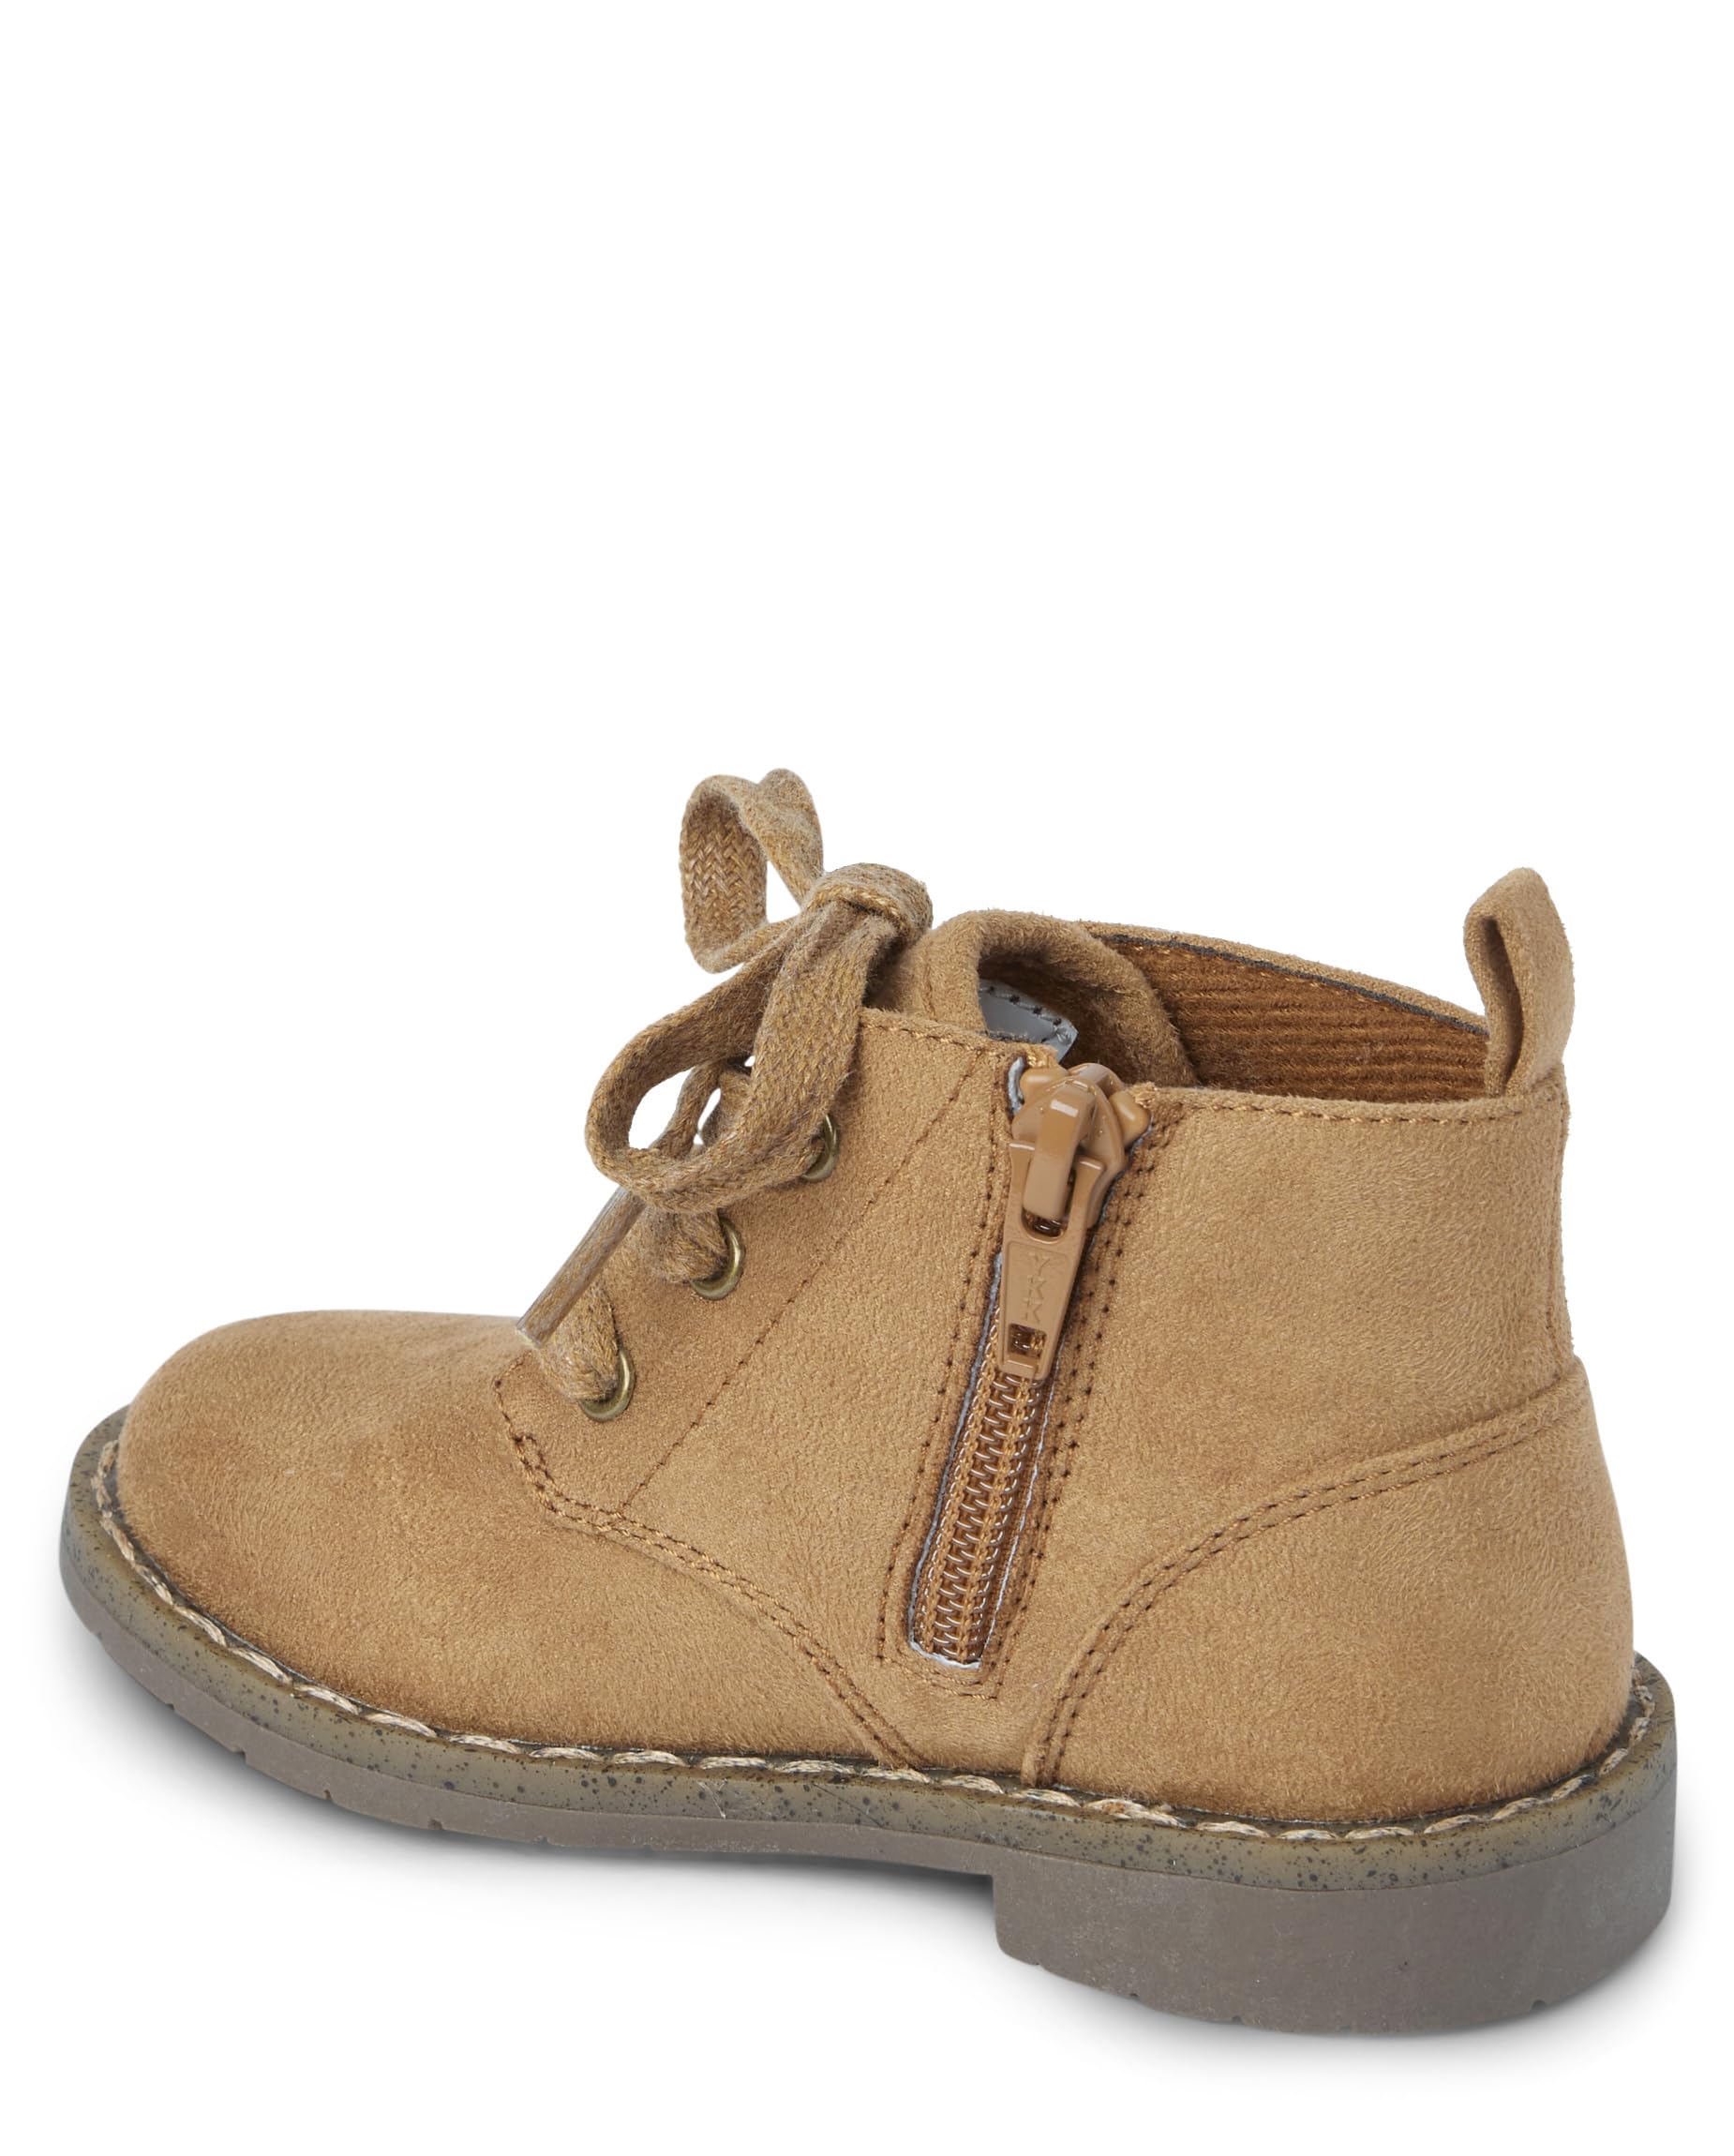 Gymboree Unisex-Child and Toddler Short Ankle Boots